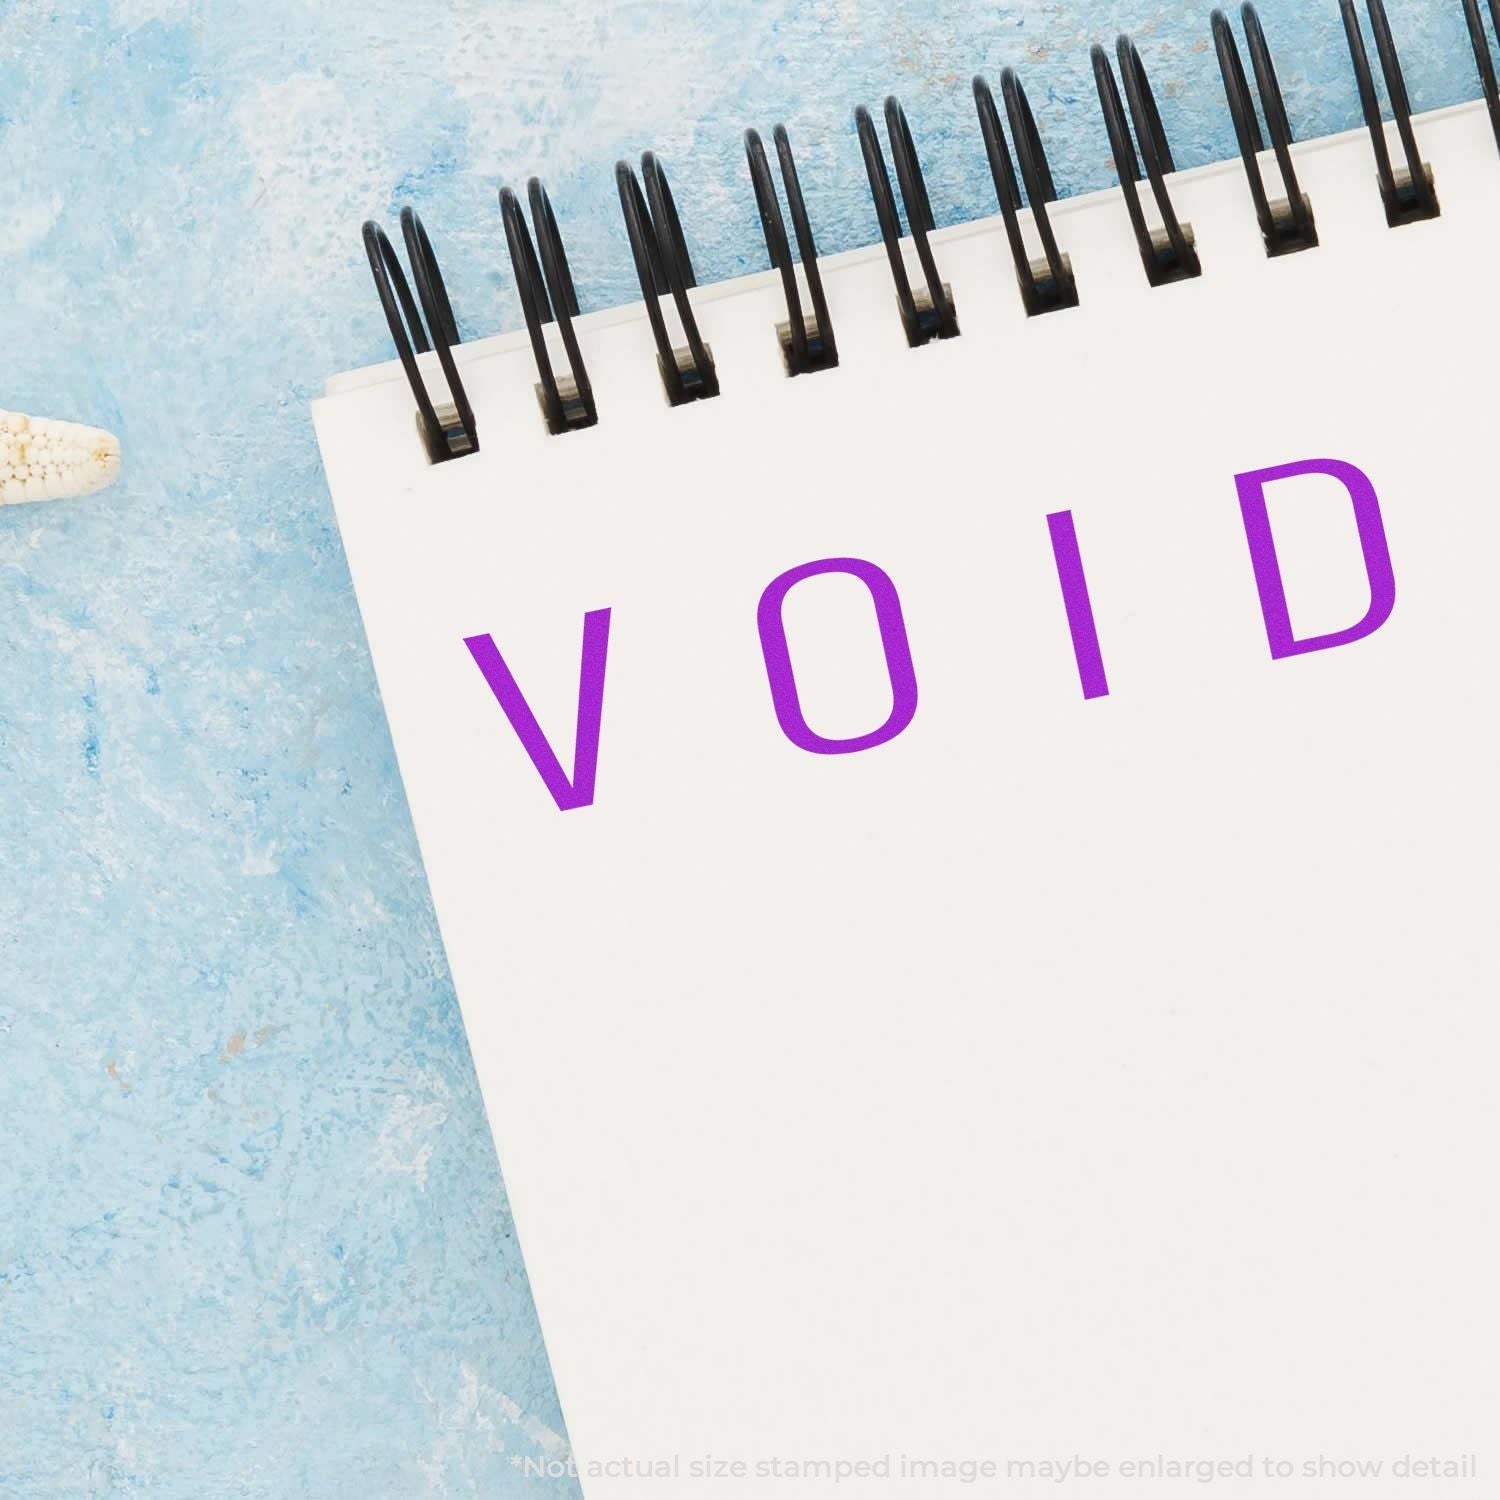 A self-inking stamp with a stamped image showing how the text "V O I D" in a narrow font is displayed after stamping.